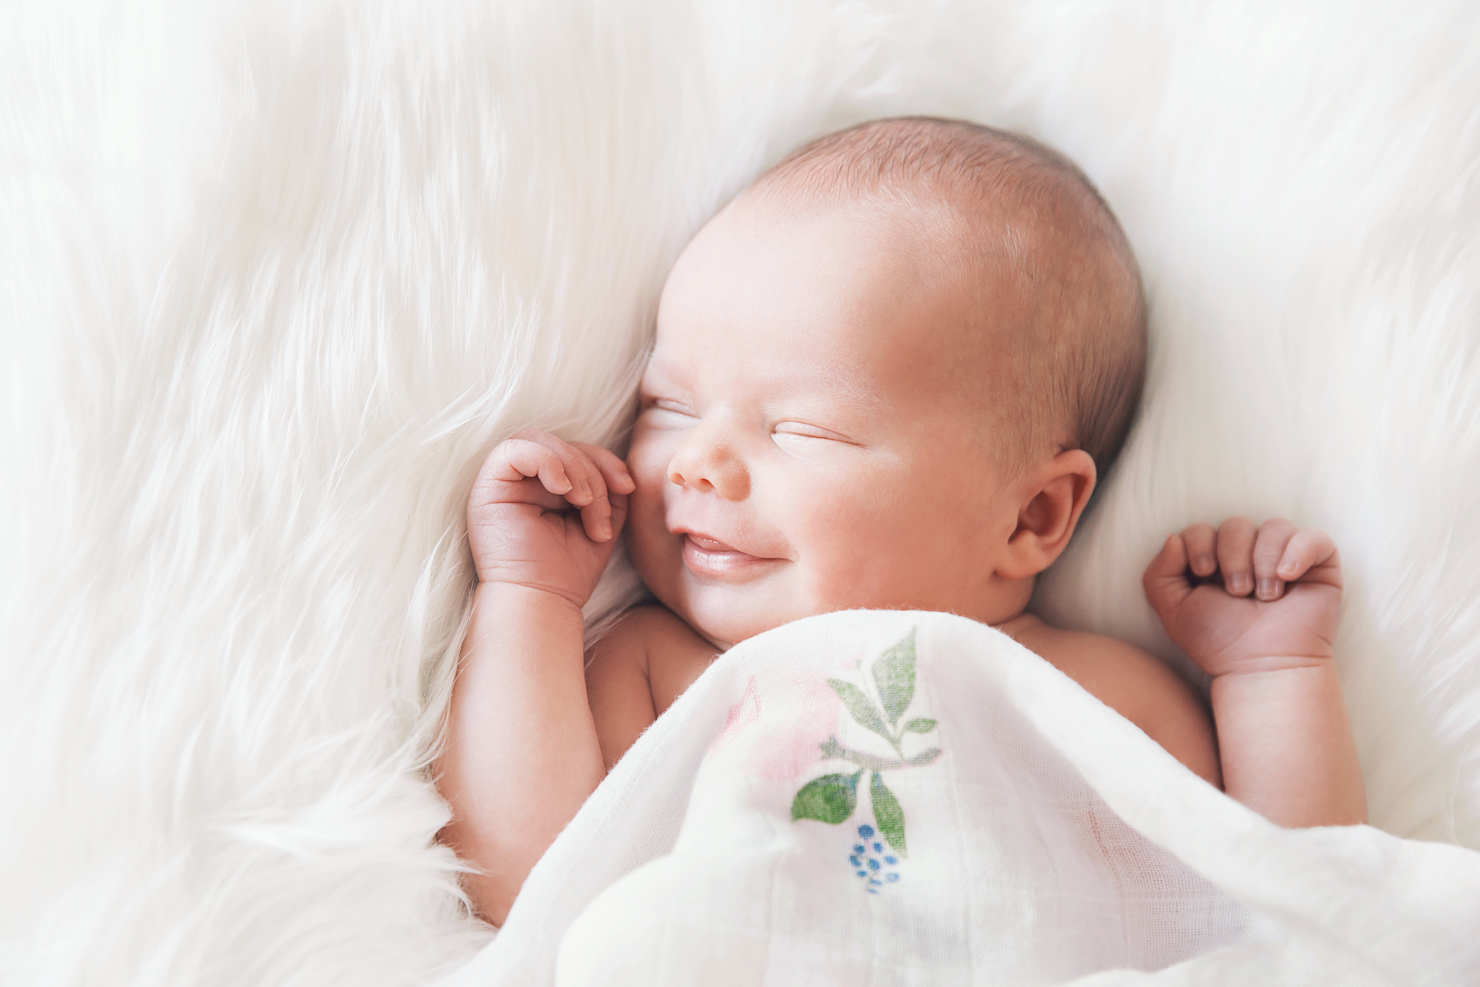 Dreaming infant sleeping on a white fuzzy blanket